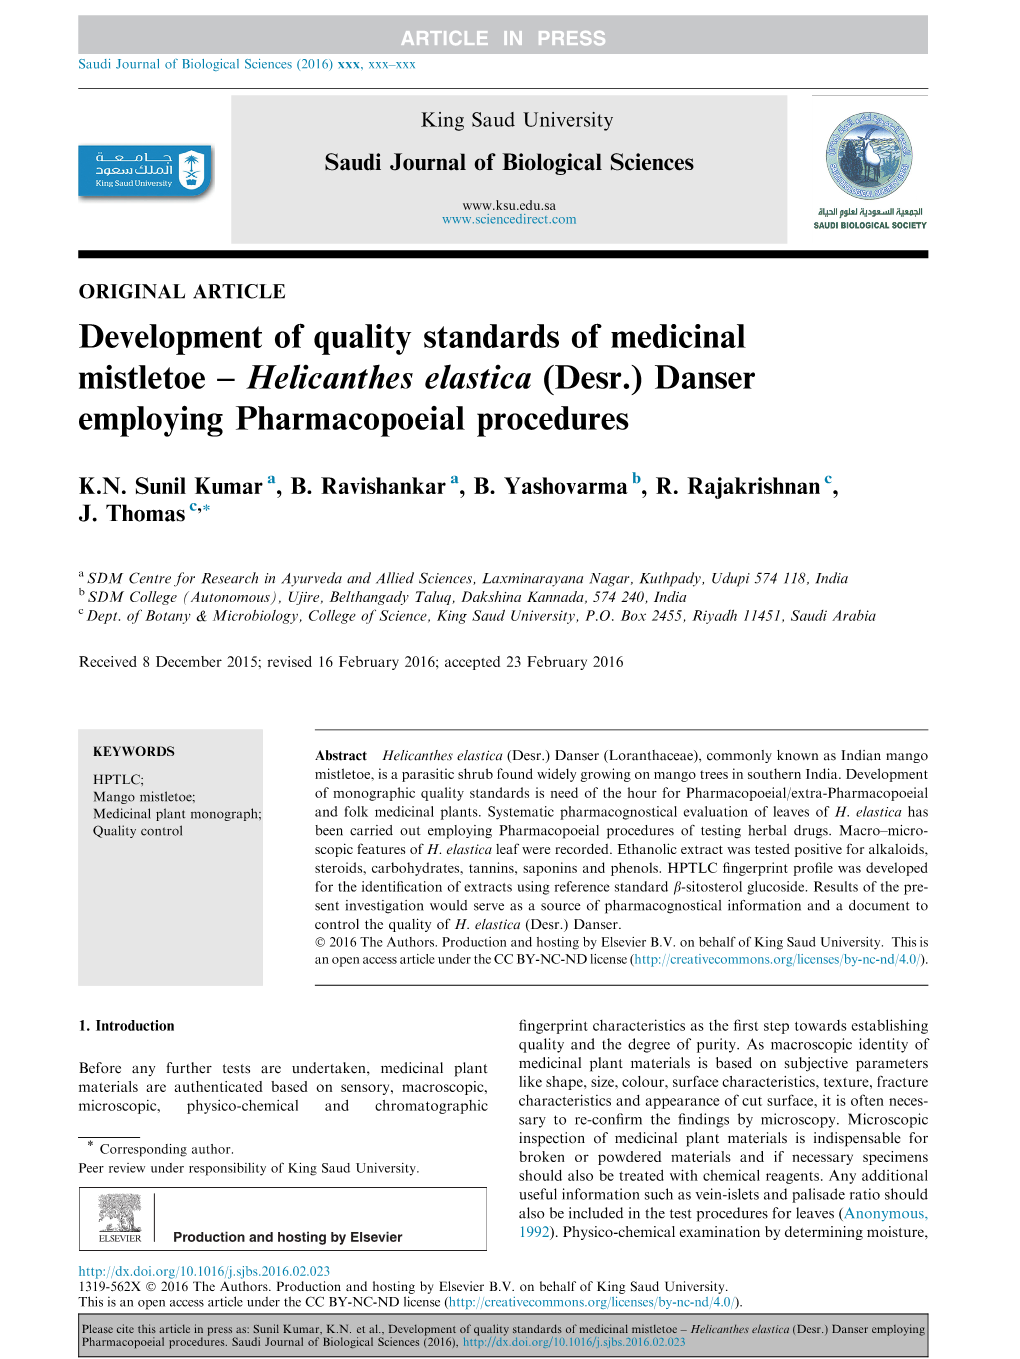 Development of Quality Standards of Medicinal Mistletoe Â€“ Helicanthes